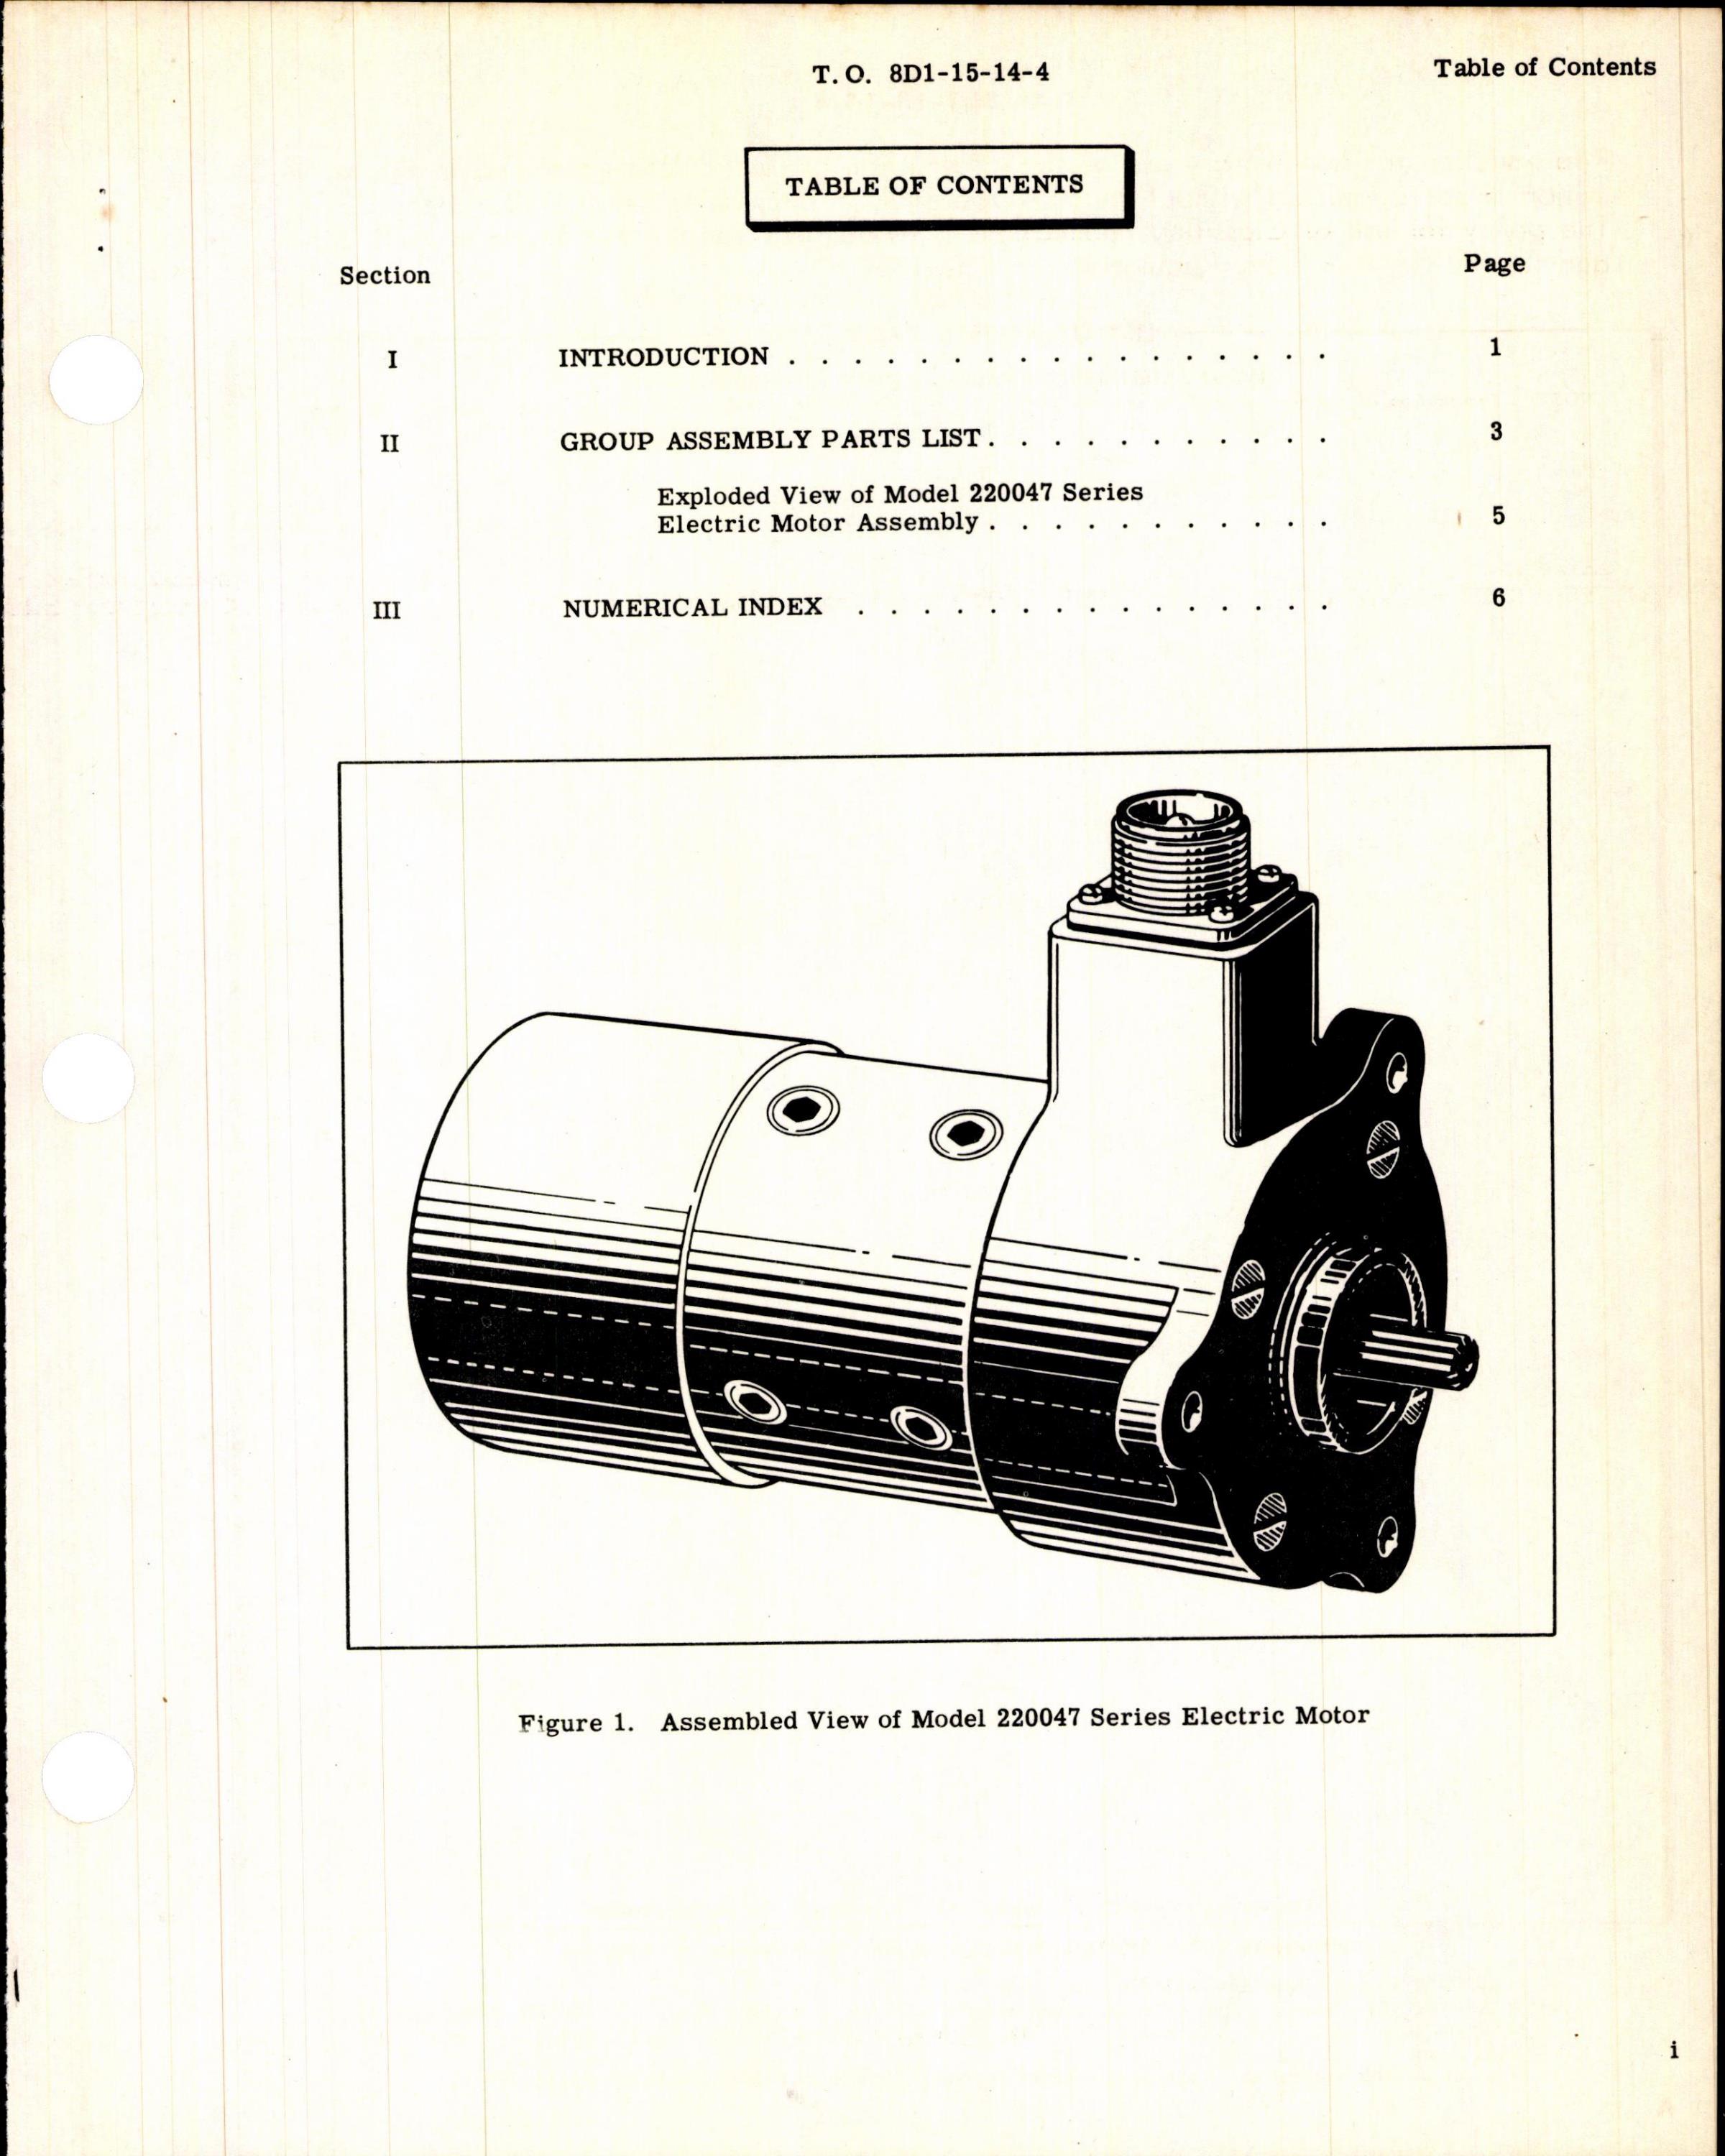 Sample page 3 from AirCorps Library document: Illustrated Parts Breakdown for Pesco Electric Motors